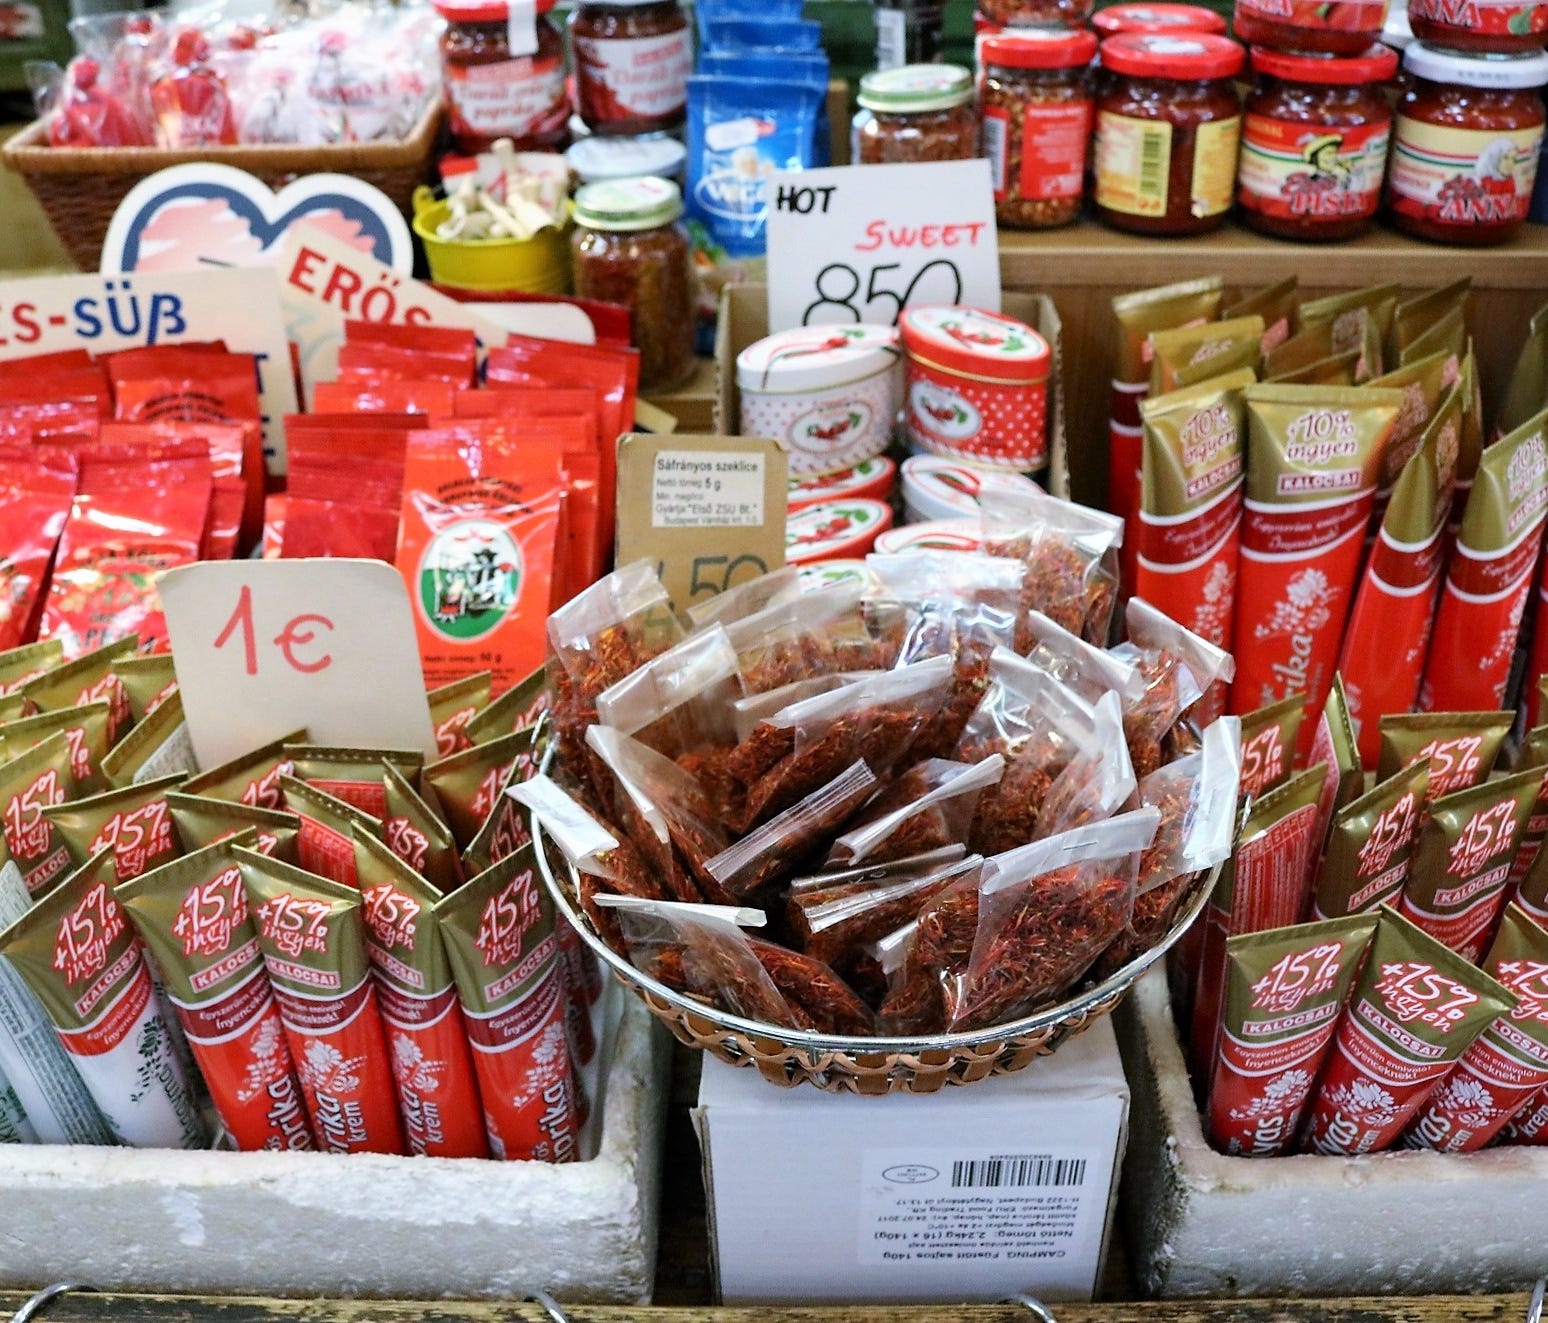 All types of paprika are available for sale at the market. Whole, dried peppers, as well as hot, sweet and smoked paprika powders, and paprika paste are among the offerings.